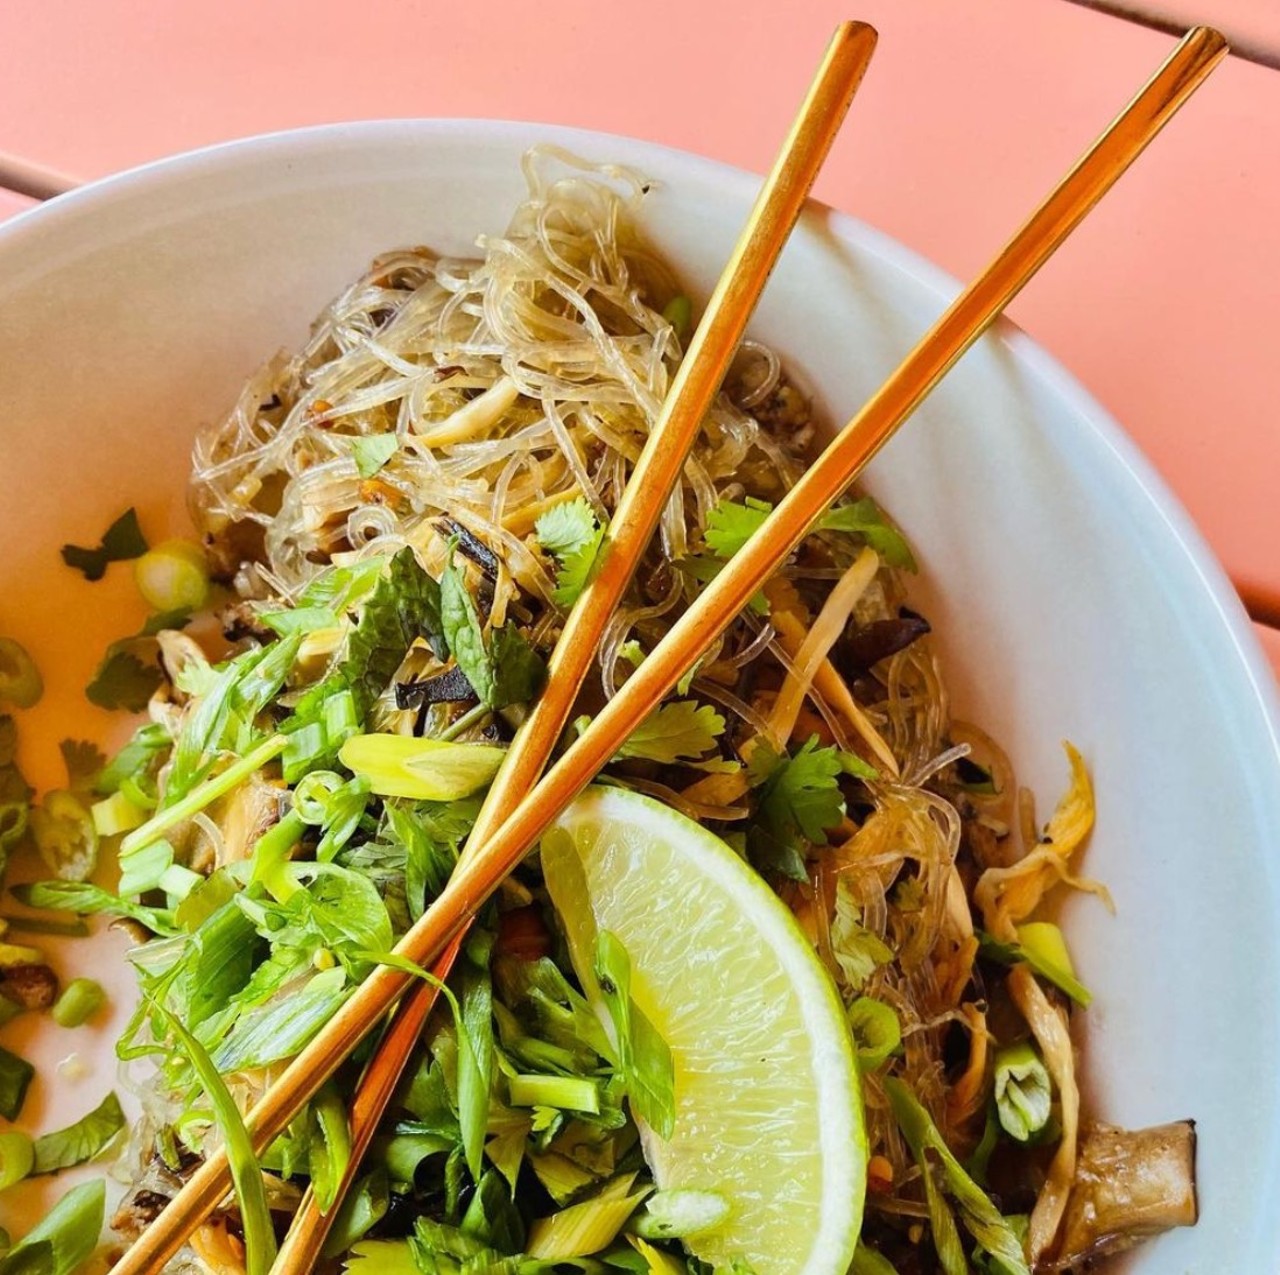 Golden Wat Noodle House
111 Kings Court
This Cambodian noodle shop — which offered traditional noodle and rice dishes that feature ingredients with a regional U.S. twist — only six months after opening.  
Photo via Instagram / goodbitesa